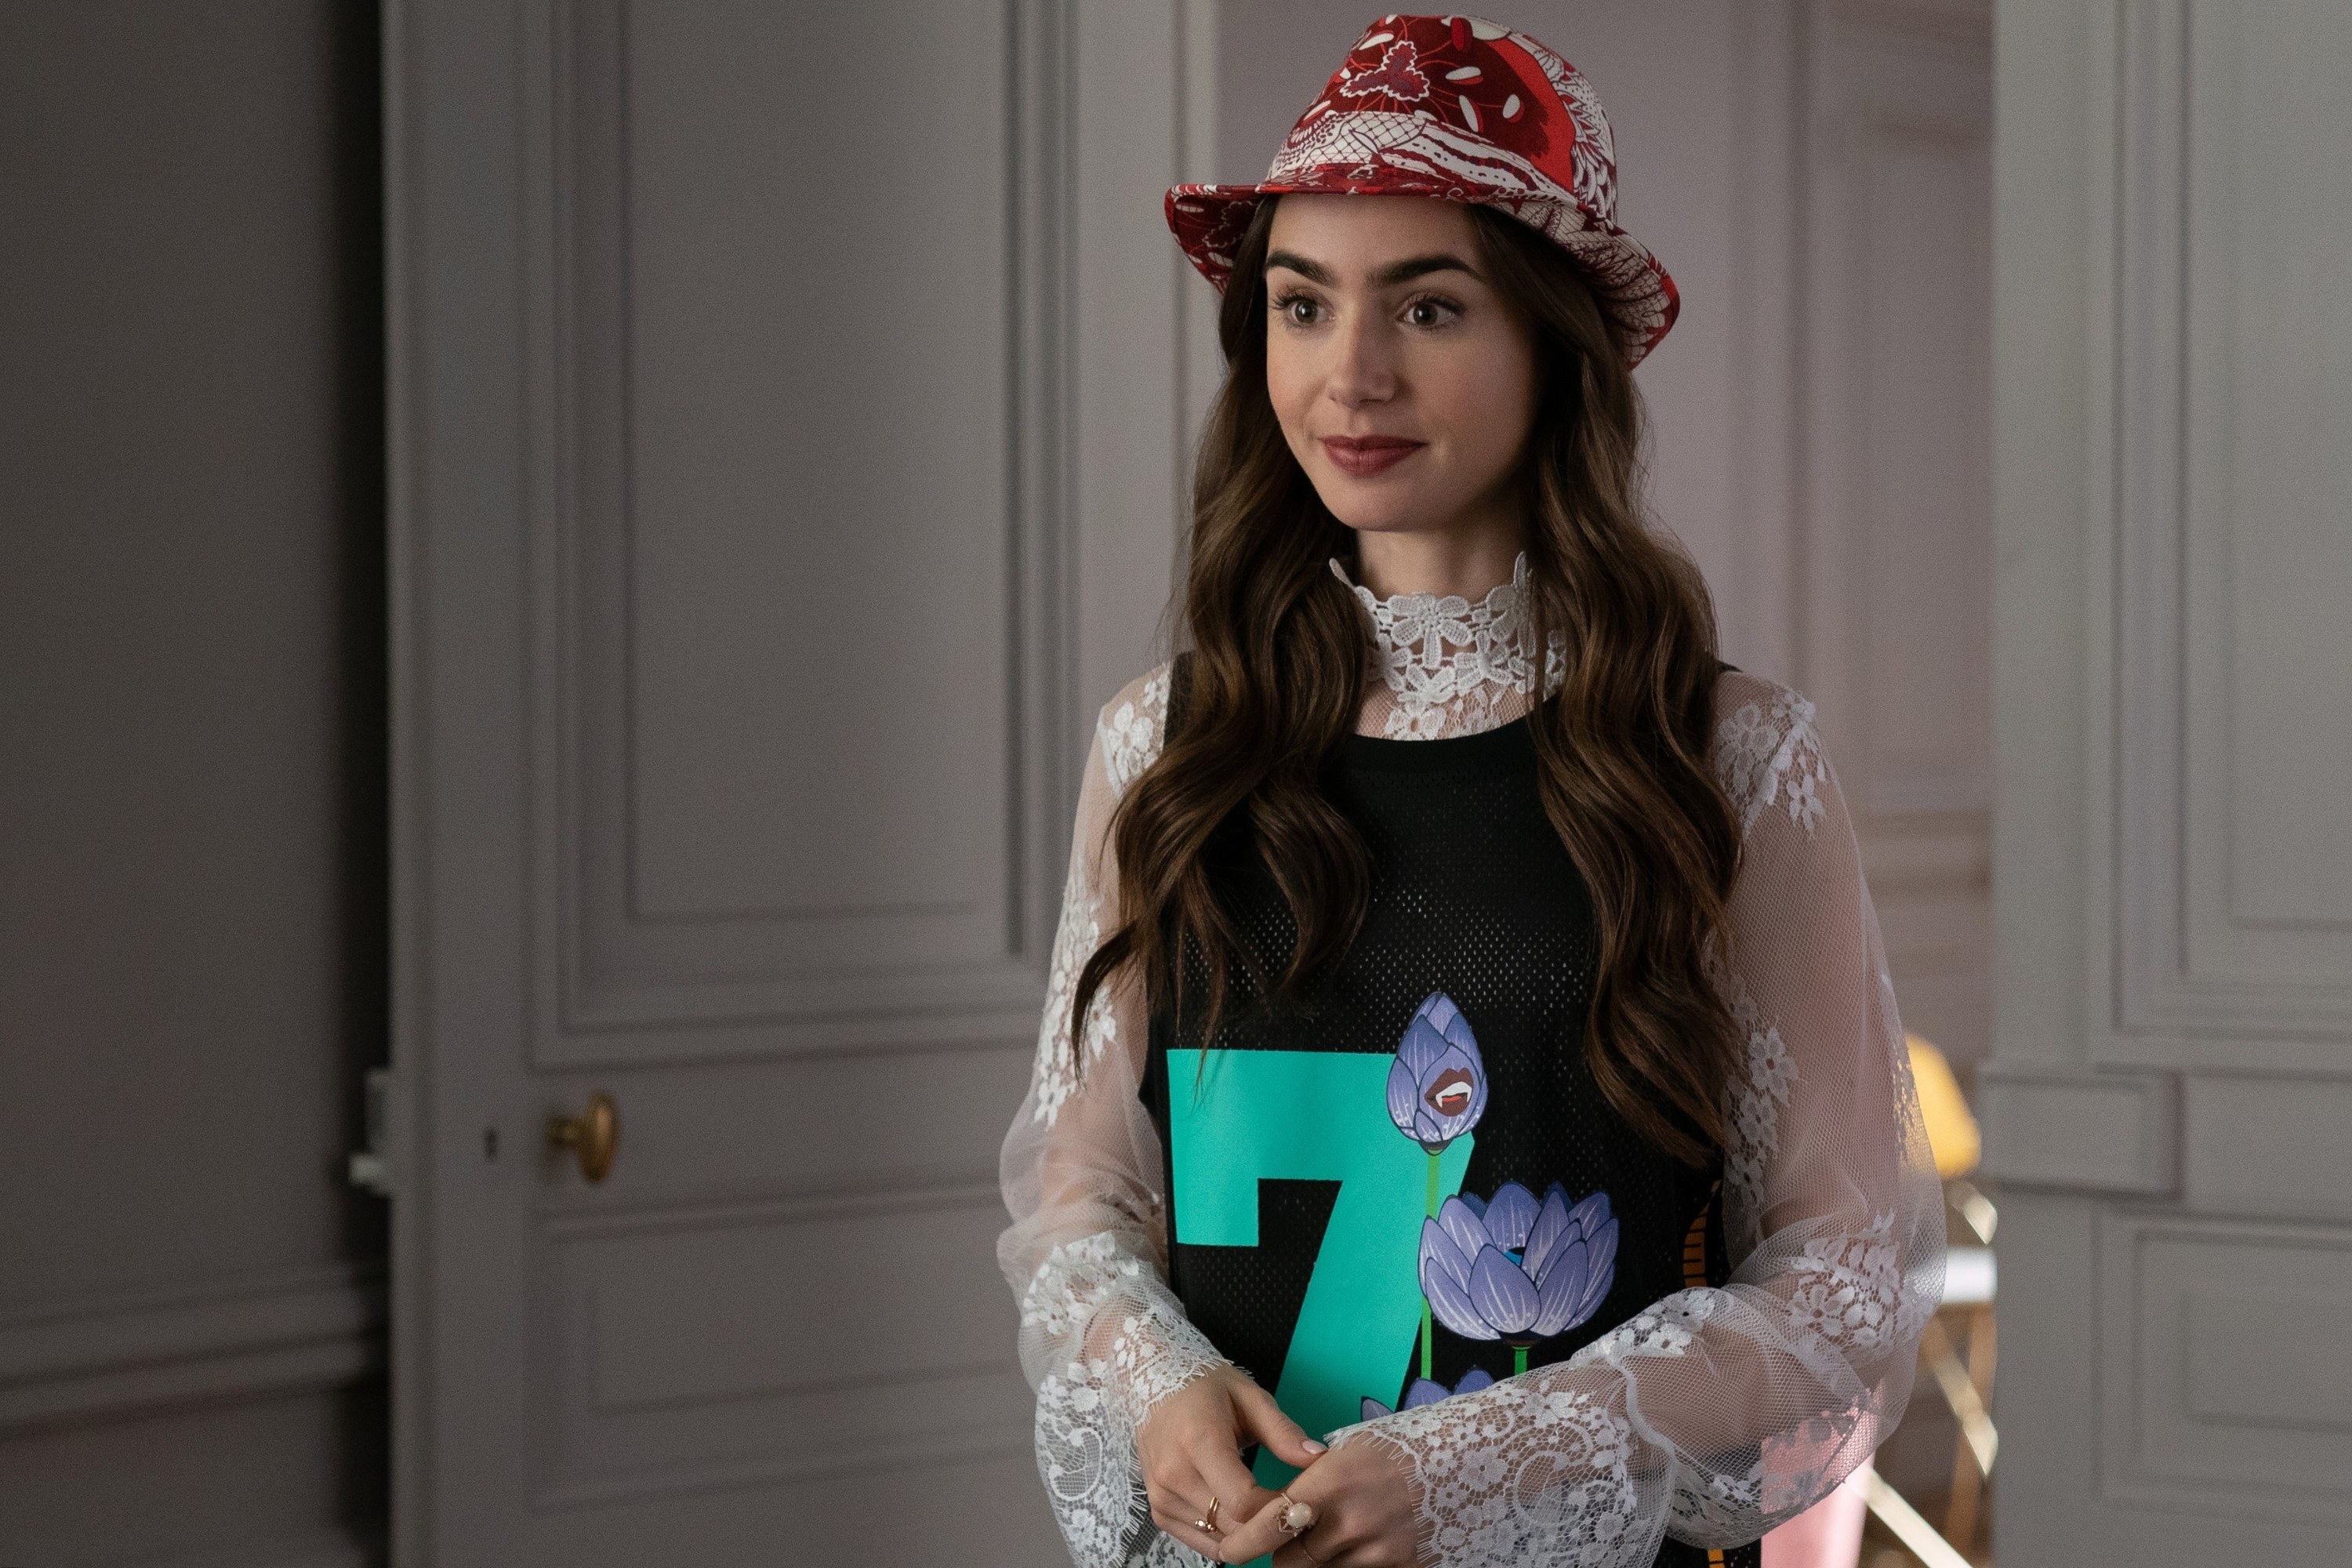 The 9 Best Emily in Paris Season 2 Outfits, Ranked